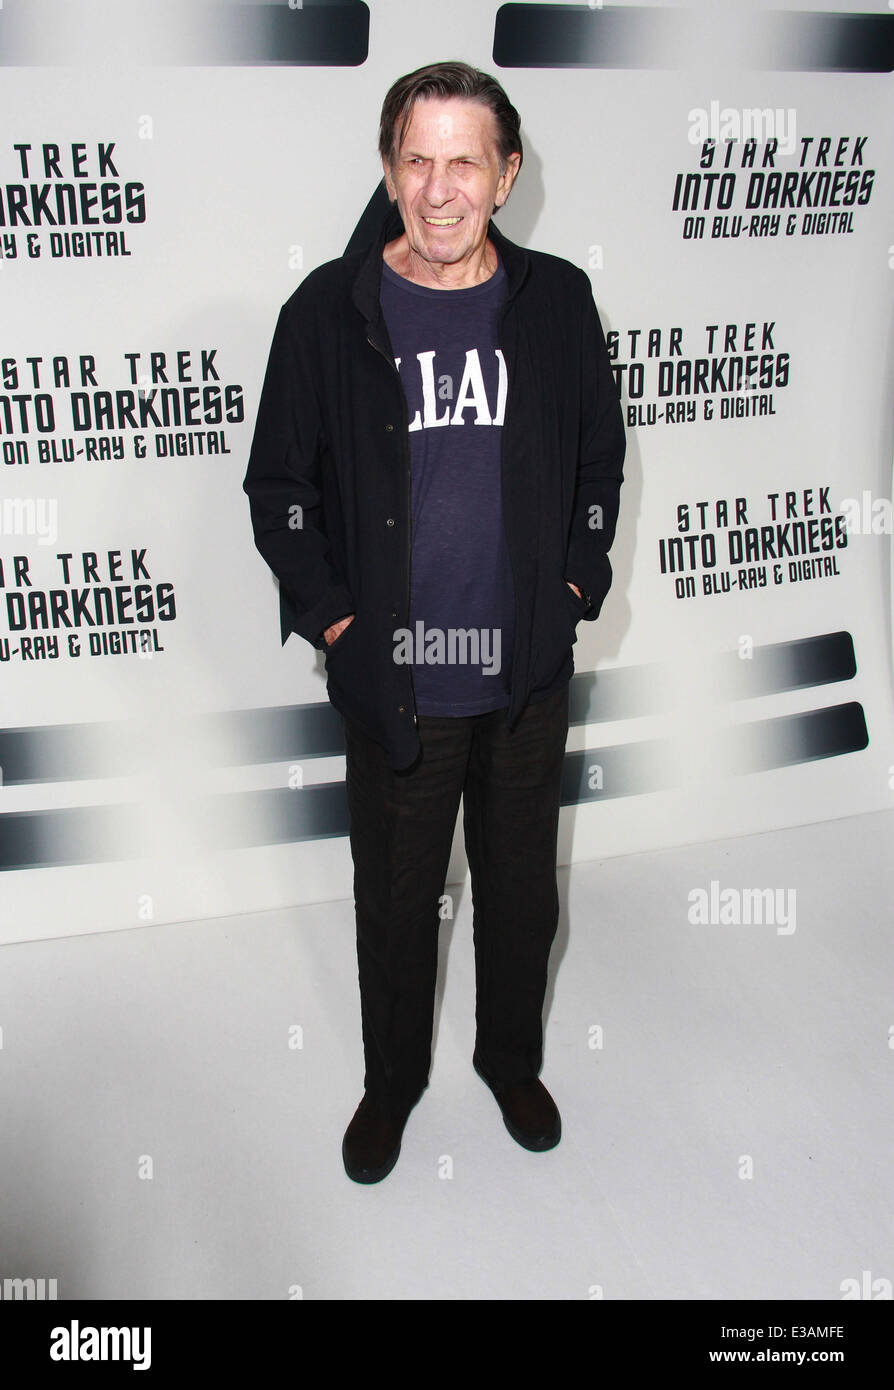 Paramount Pictures Celebrates The Blu-ray And DVD Debut Of 'Star Trek: Into Darkness' Held at California Science Center  Featuring: Leonard Nimoy Where: Los Angeles, California, United States When: 11 Sep 2013 Stock Photo